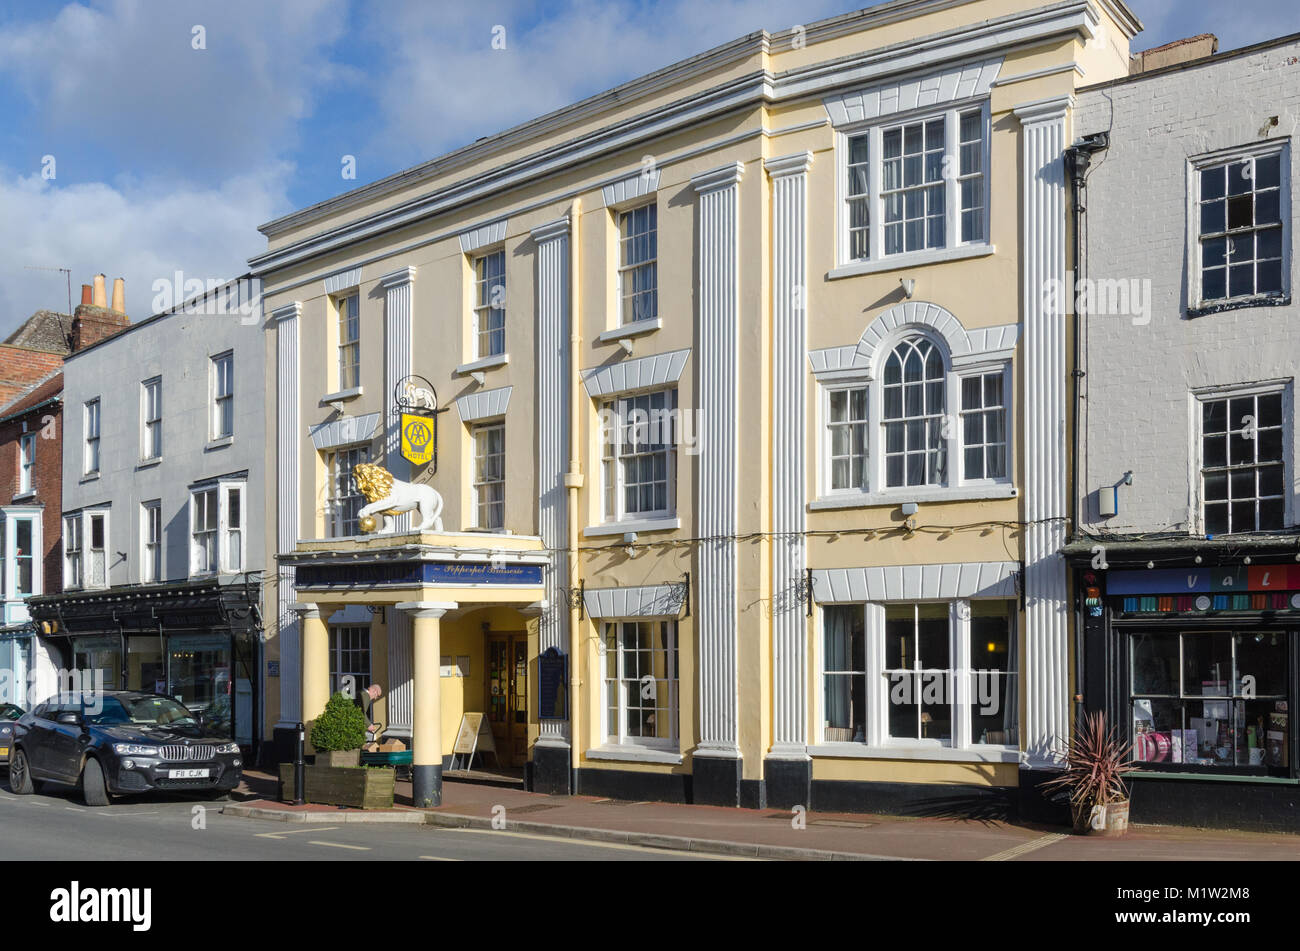 The White Lion Hotel in the Worcestershire town of Upton upon Severn Stock Photo